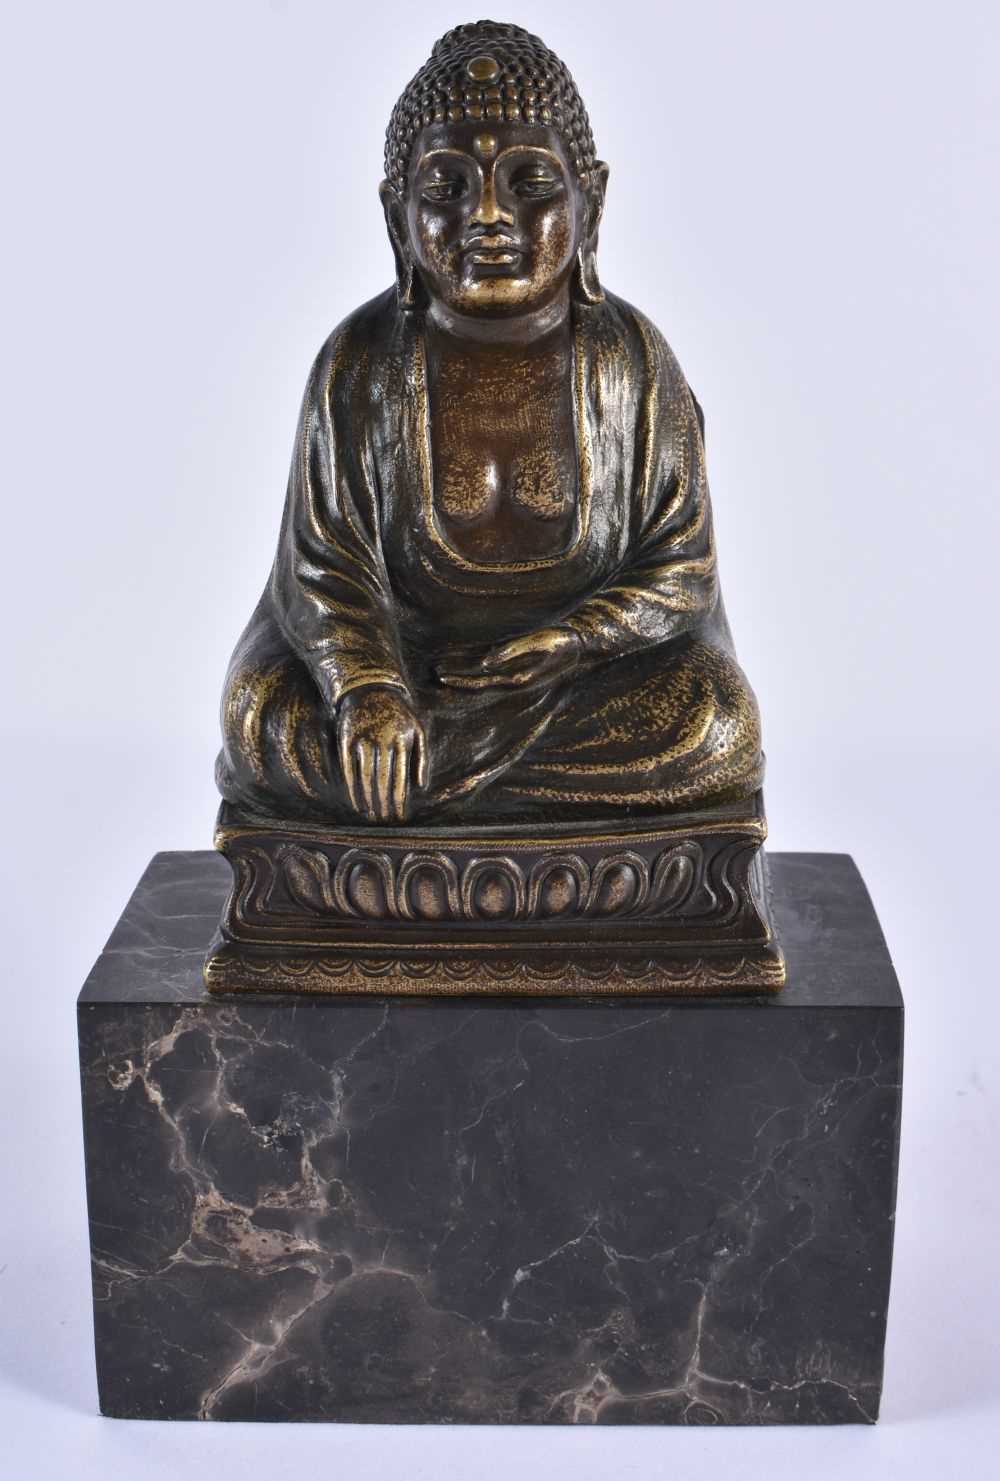 A RARE LATE 19TH/20TH CENTURY AUSTRIAN COLD PAINTED BRONZE EROTIC BUDDHA FIGURE the front opening to